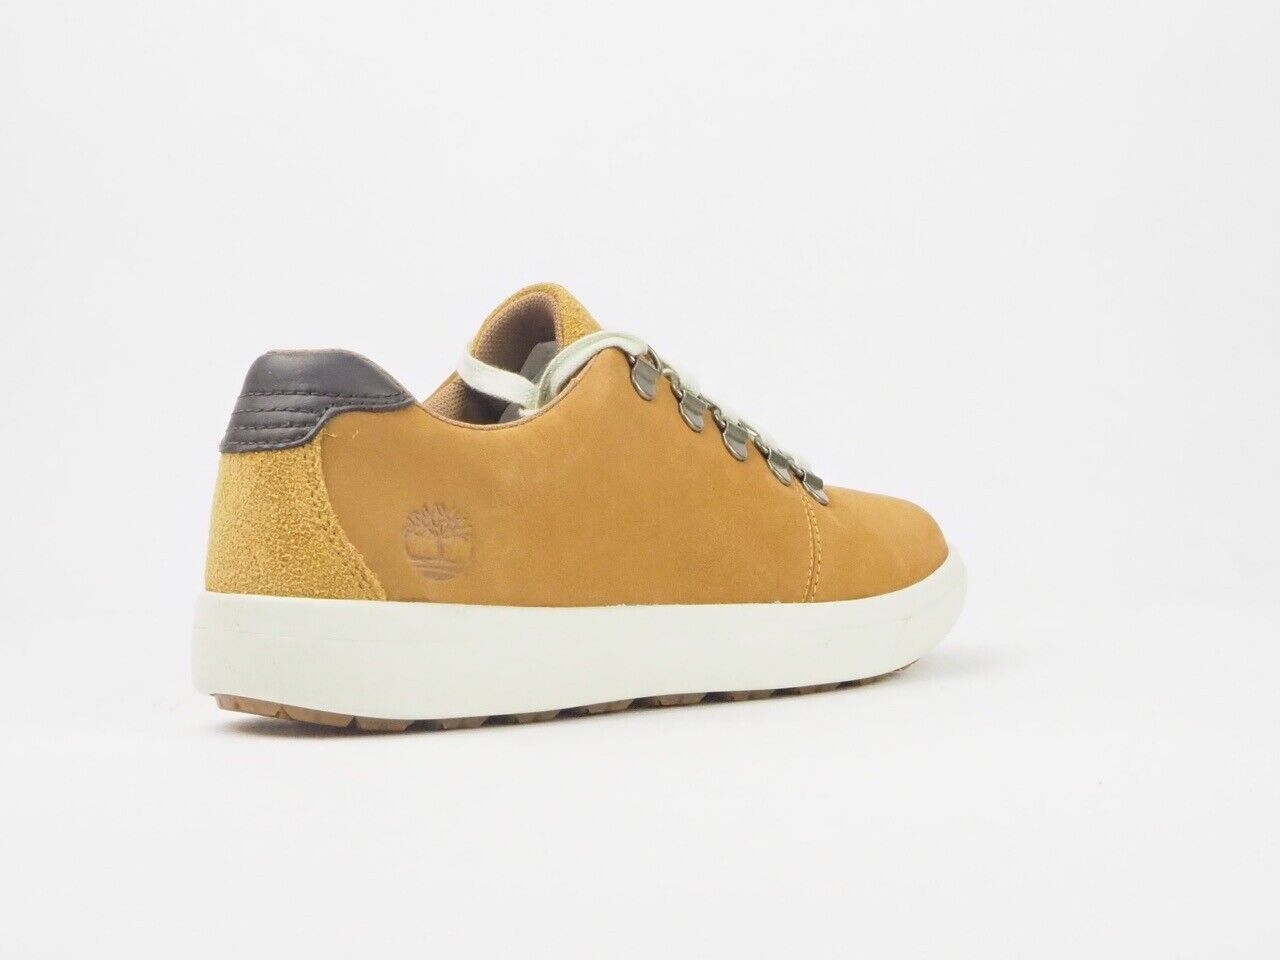 Mens Timberland Ashwood Park Alpine Oxford A23S2 Wheat Leather Lace Up Trainers - London Top Style